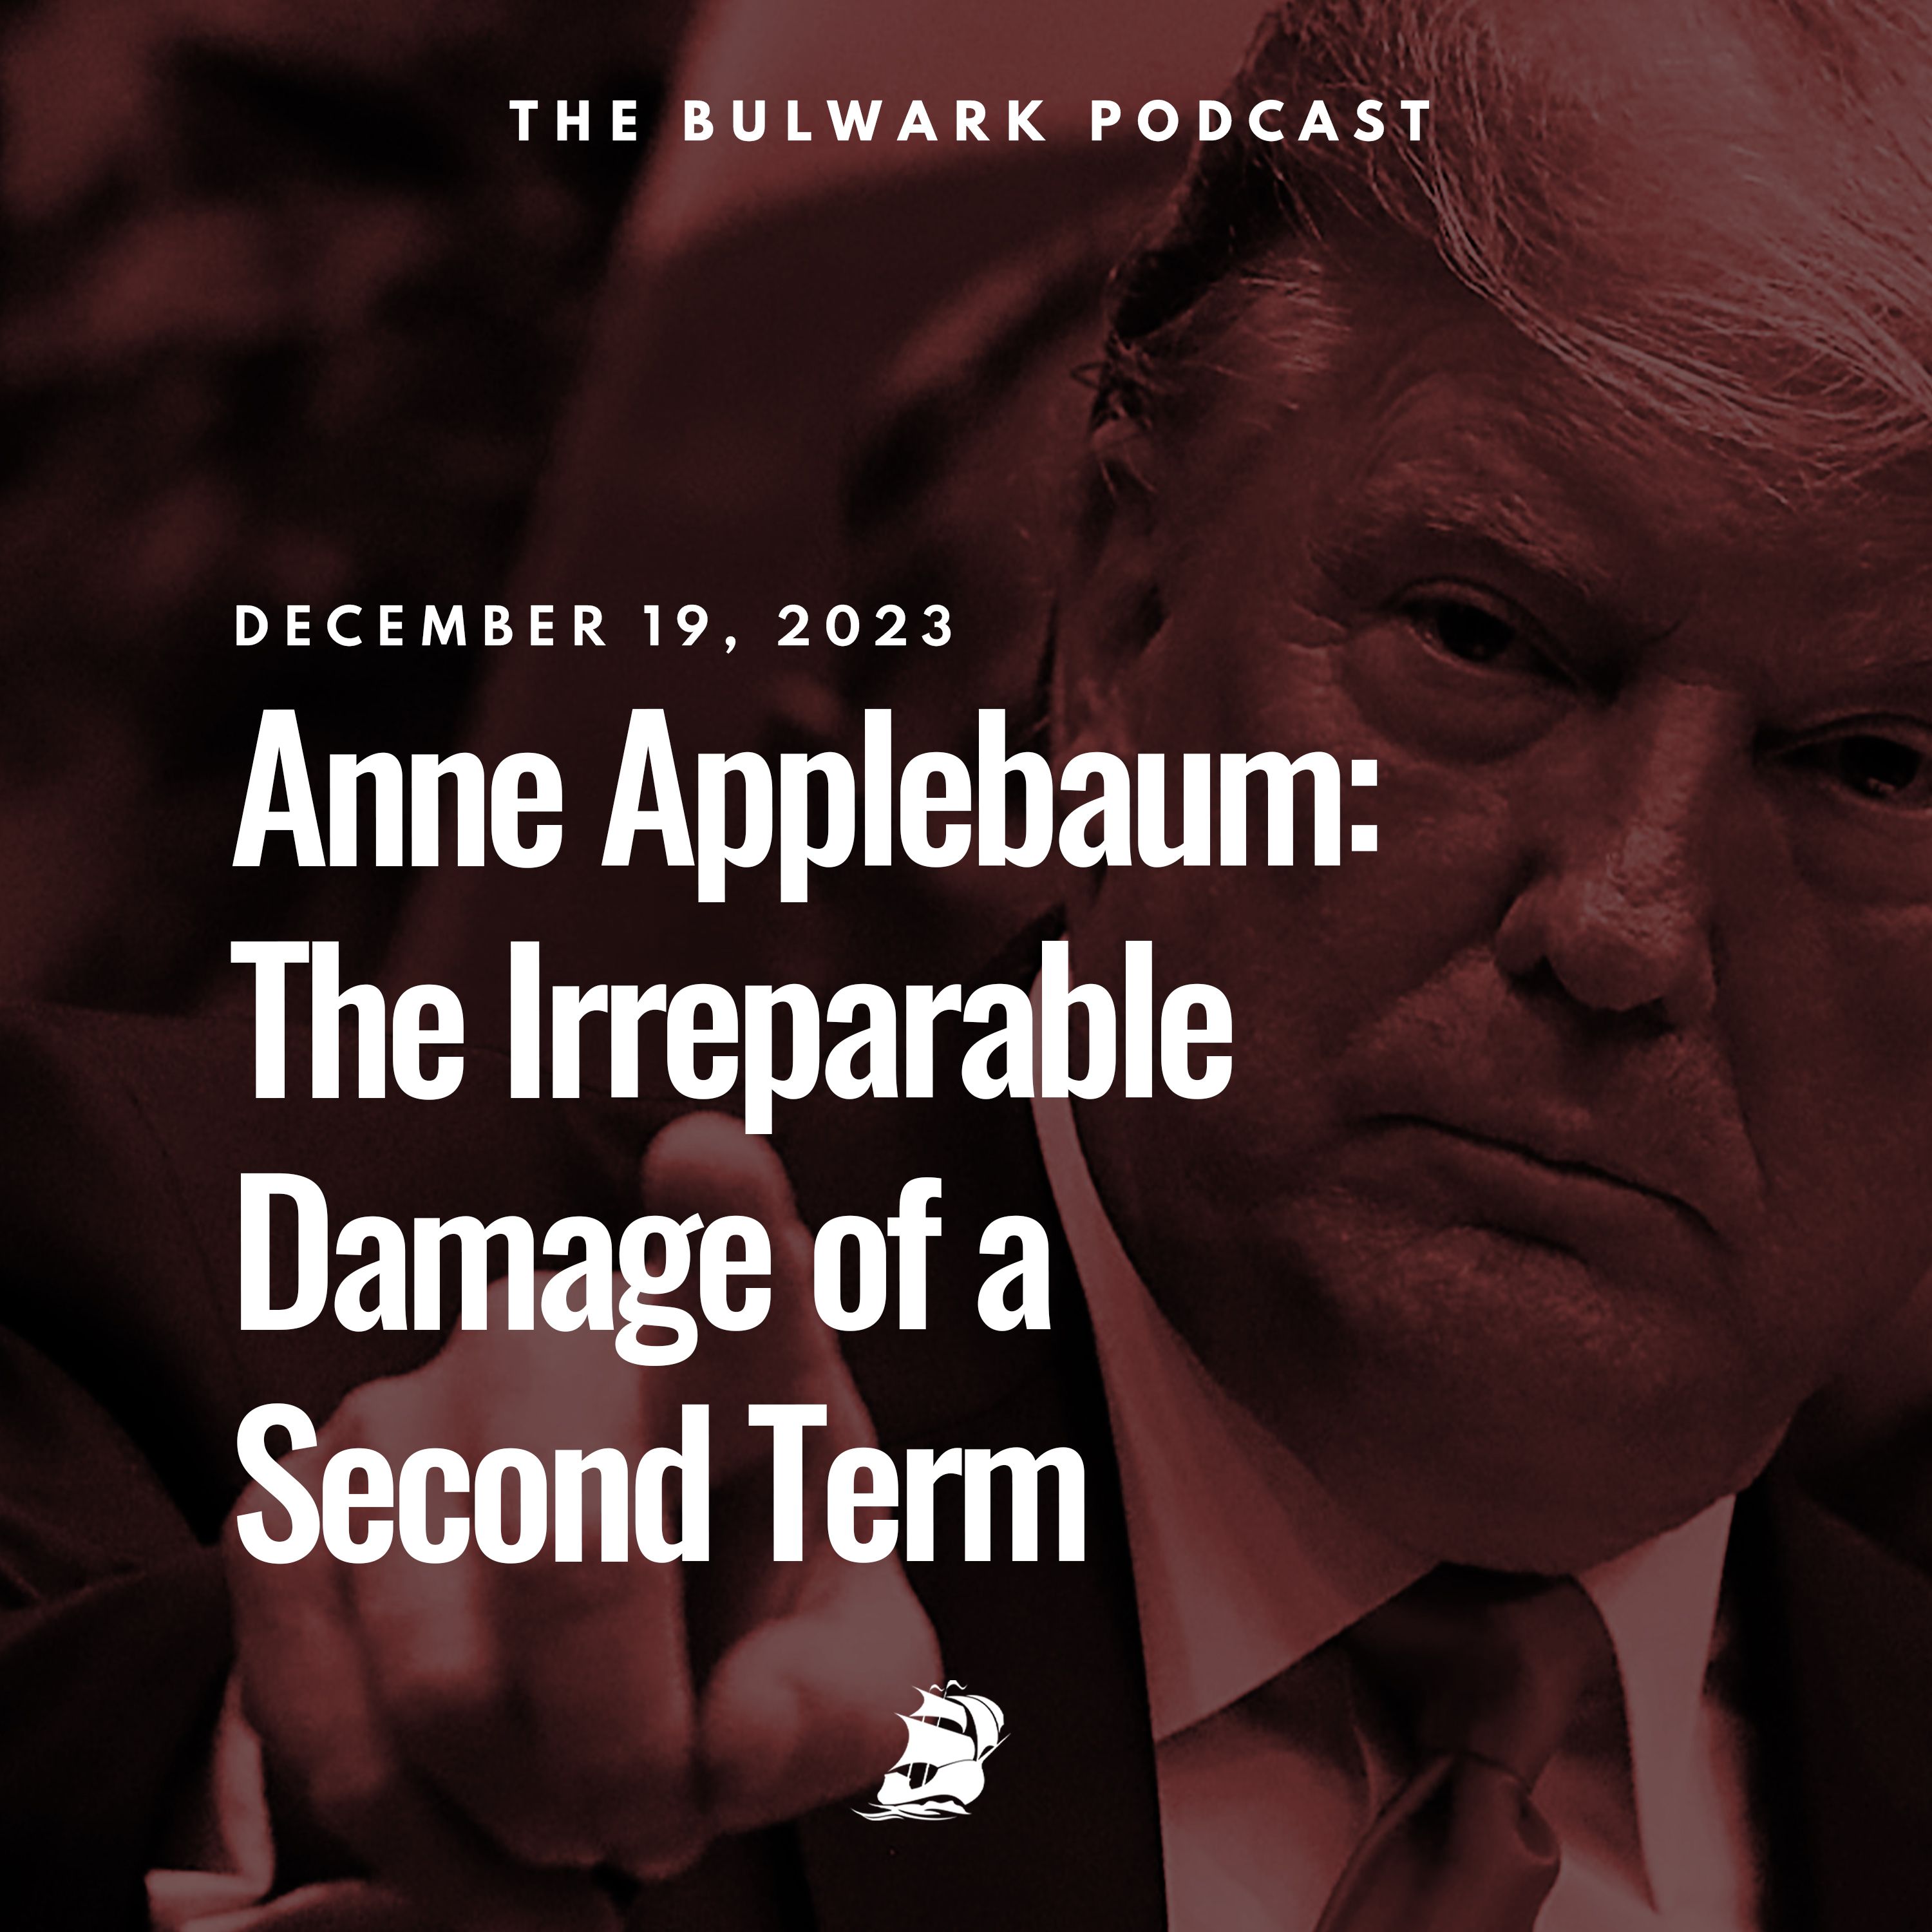 Anne Applebaum: The Irreparable Damage of a Second Term by The Bulwark Podcast